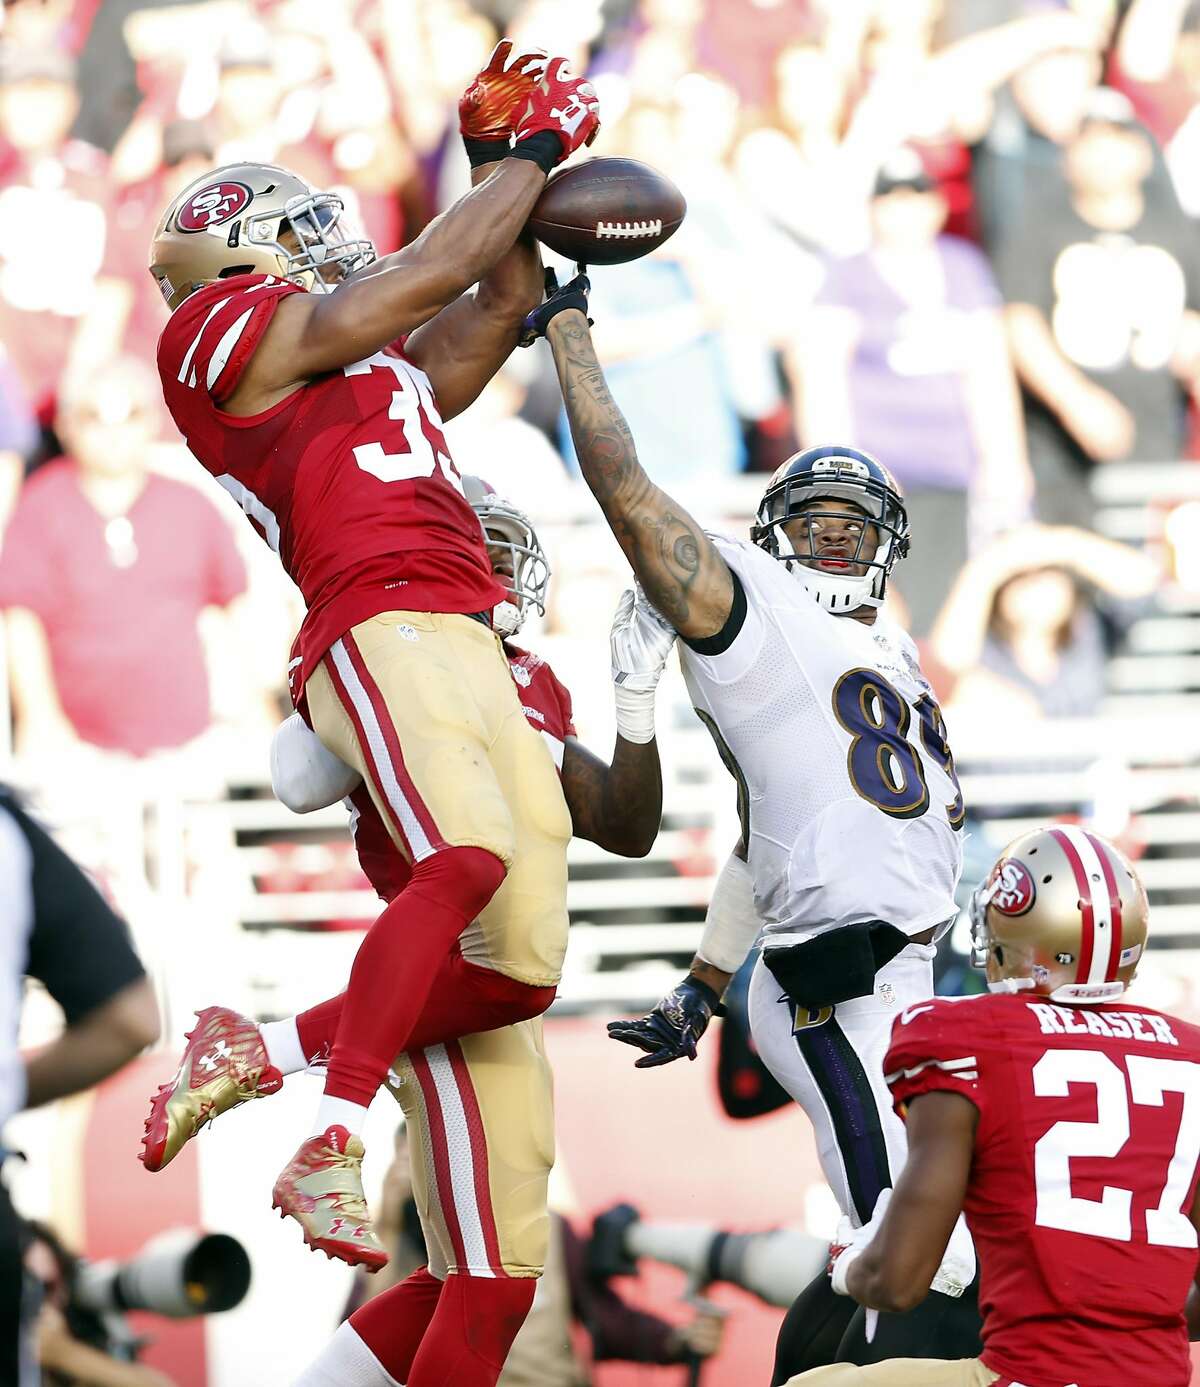 San Francisco 49ers' Eric Reid breaks up pass to Baltimore Ravens' Steve Smith, Sr. during final seconds of Niners' 25-20 win in NFL game at Levi's Stadium in Santa Clara, Calif., on Sunday, October 18, 2015.